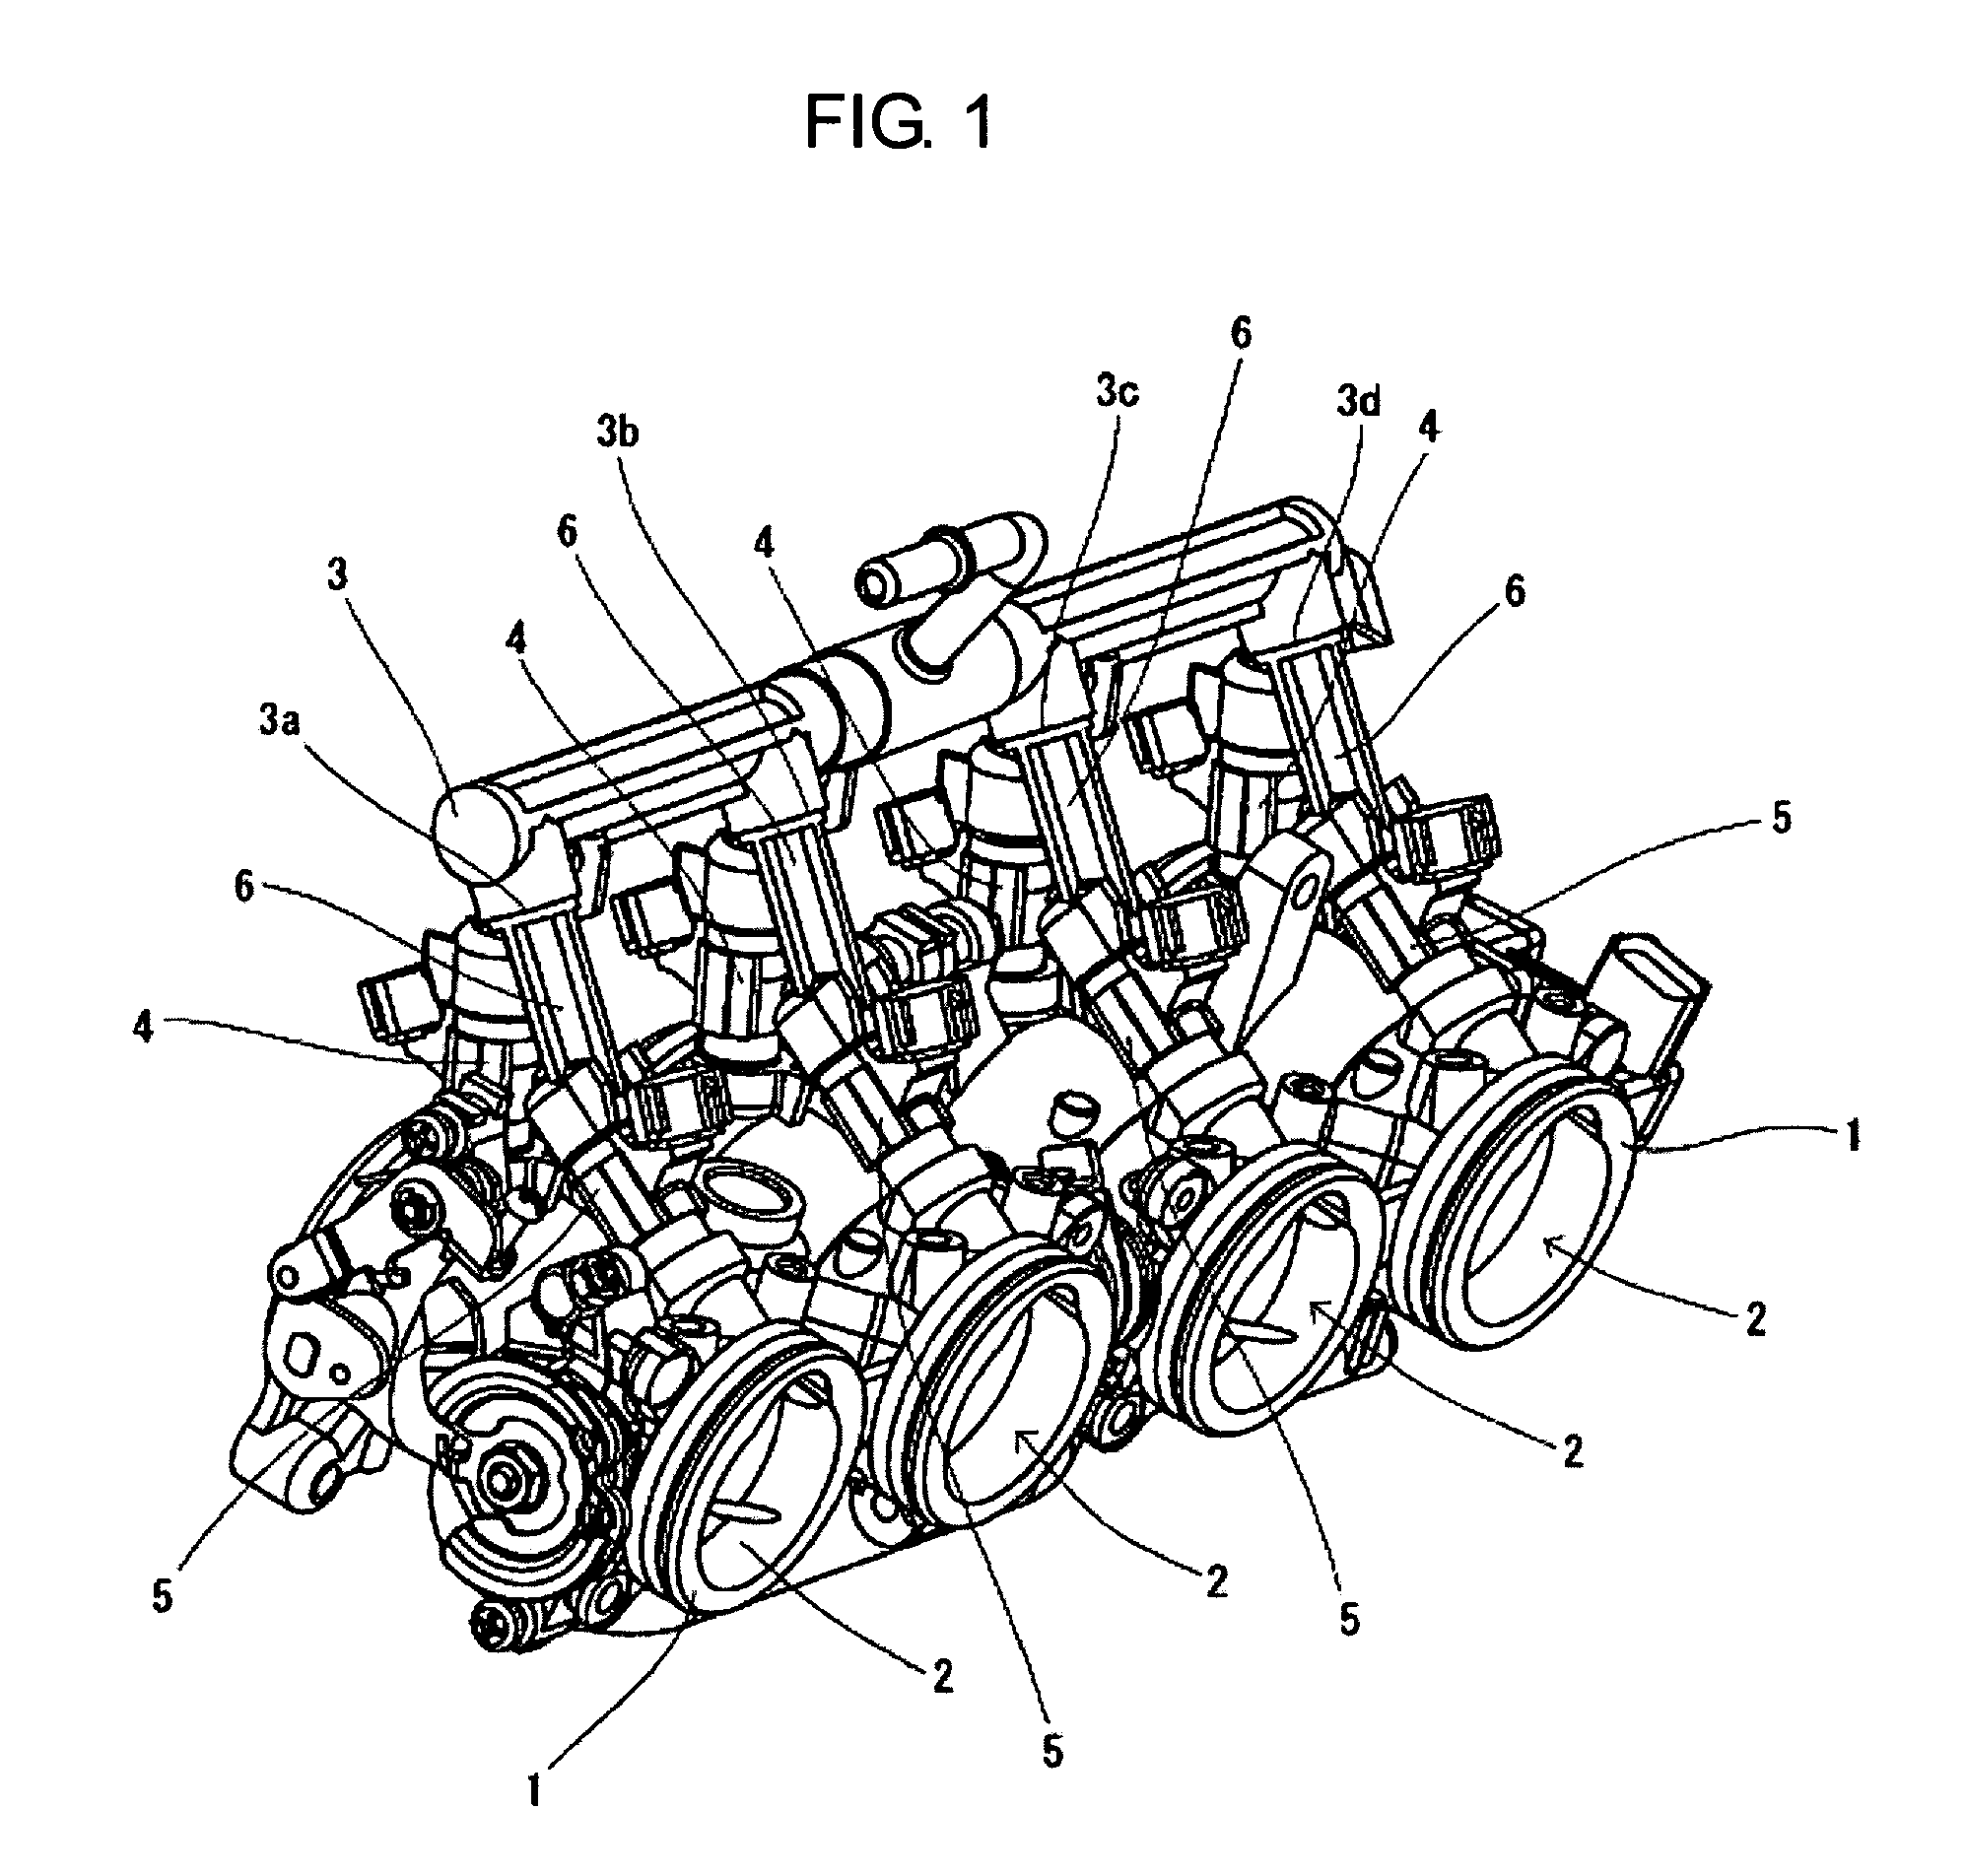 Fuel injection apparatus